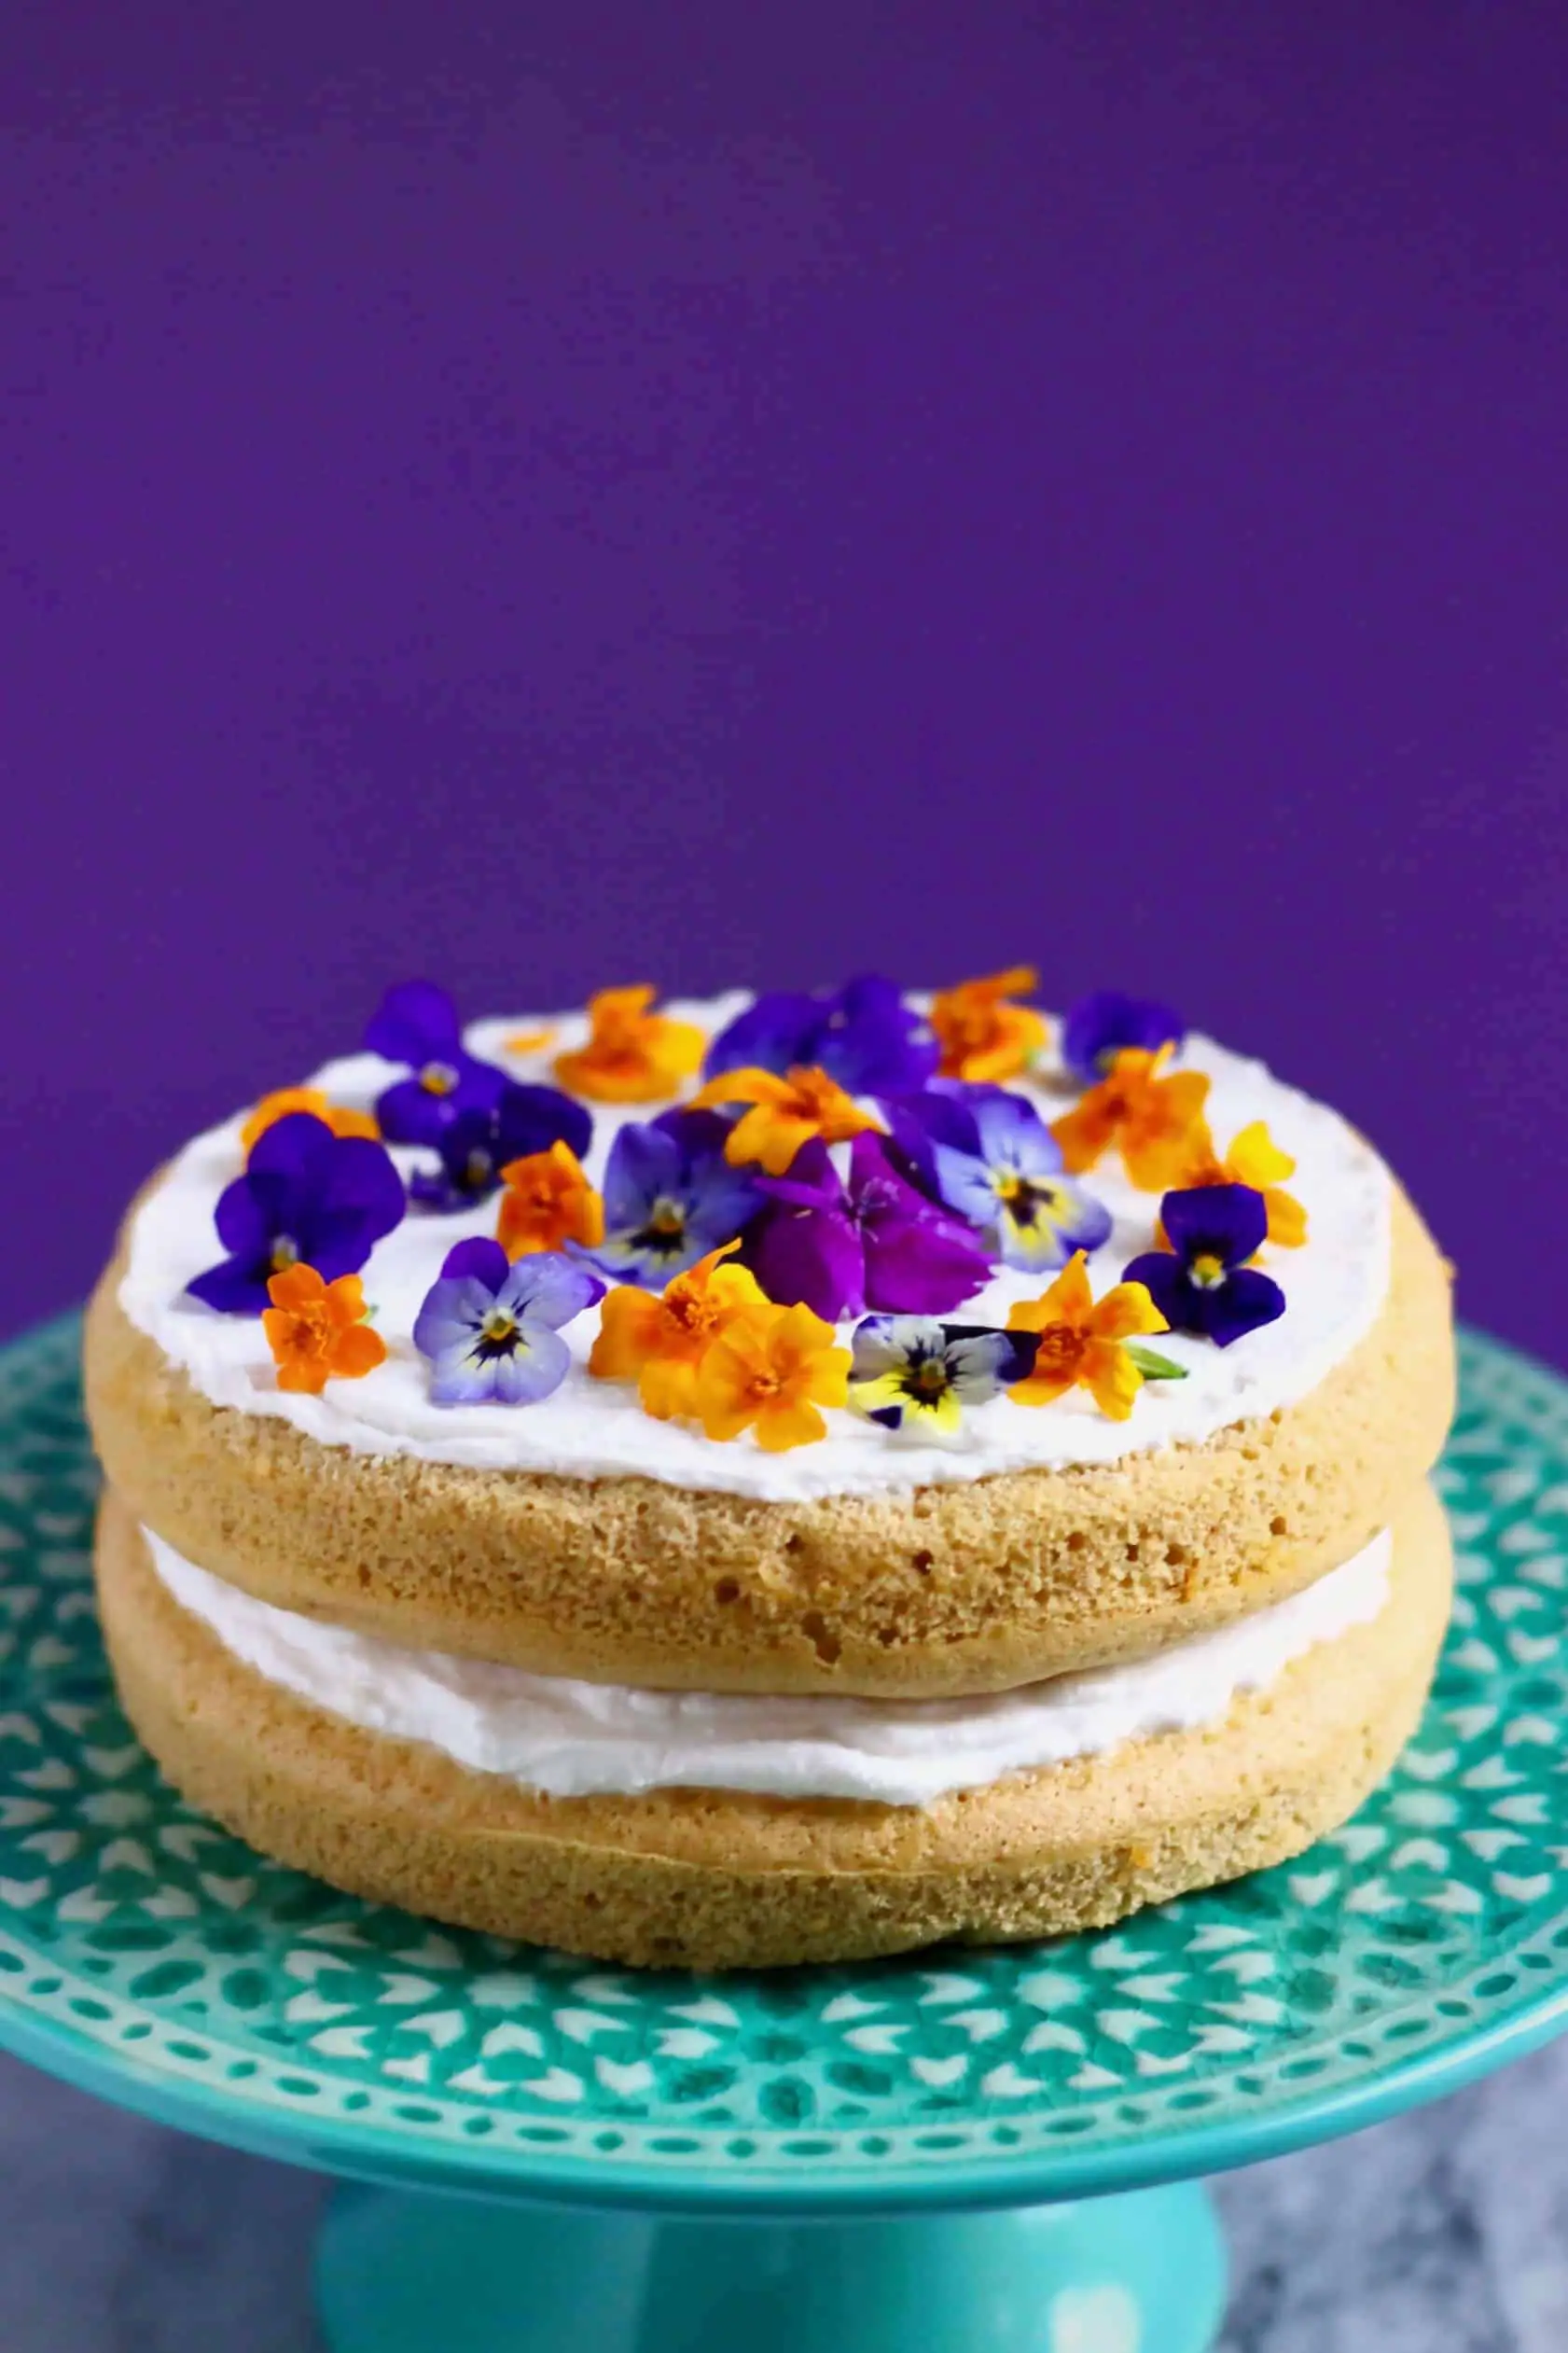 A pumpkin sponge sandwiched with white frosting topped with purple and orange flowers on a cake stand 